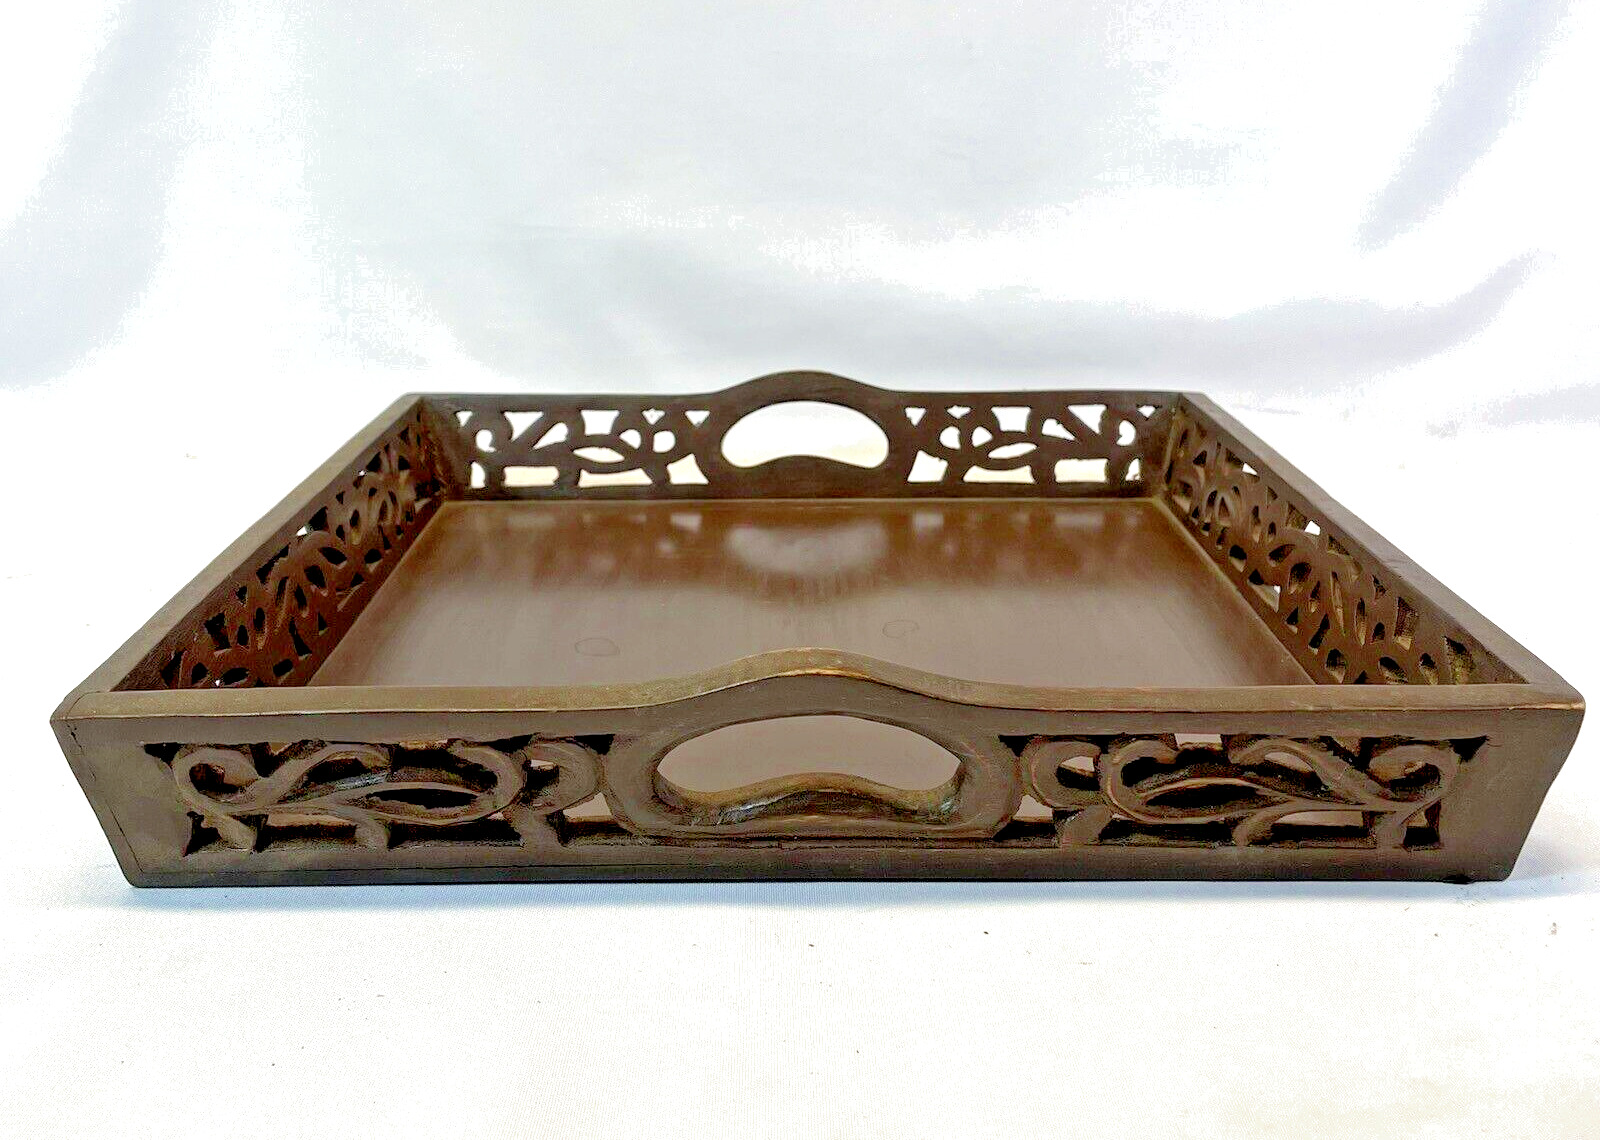 World Market 15x15 Exquisite Hand-Carved Decorative Wooden Serving Tray